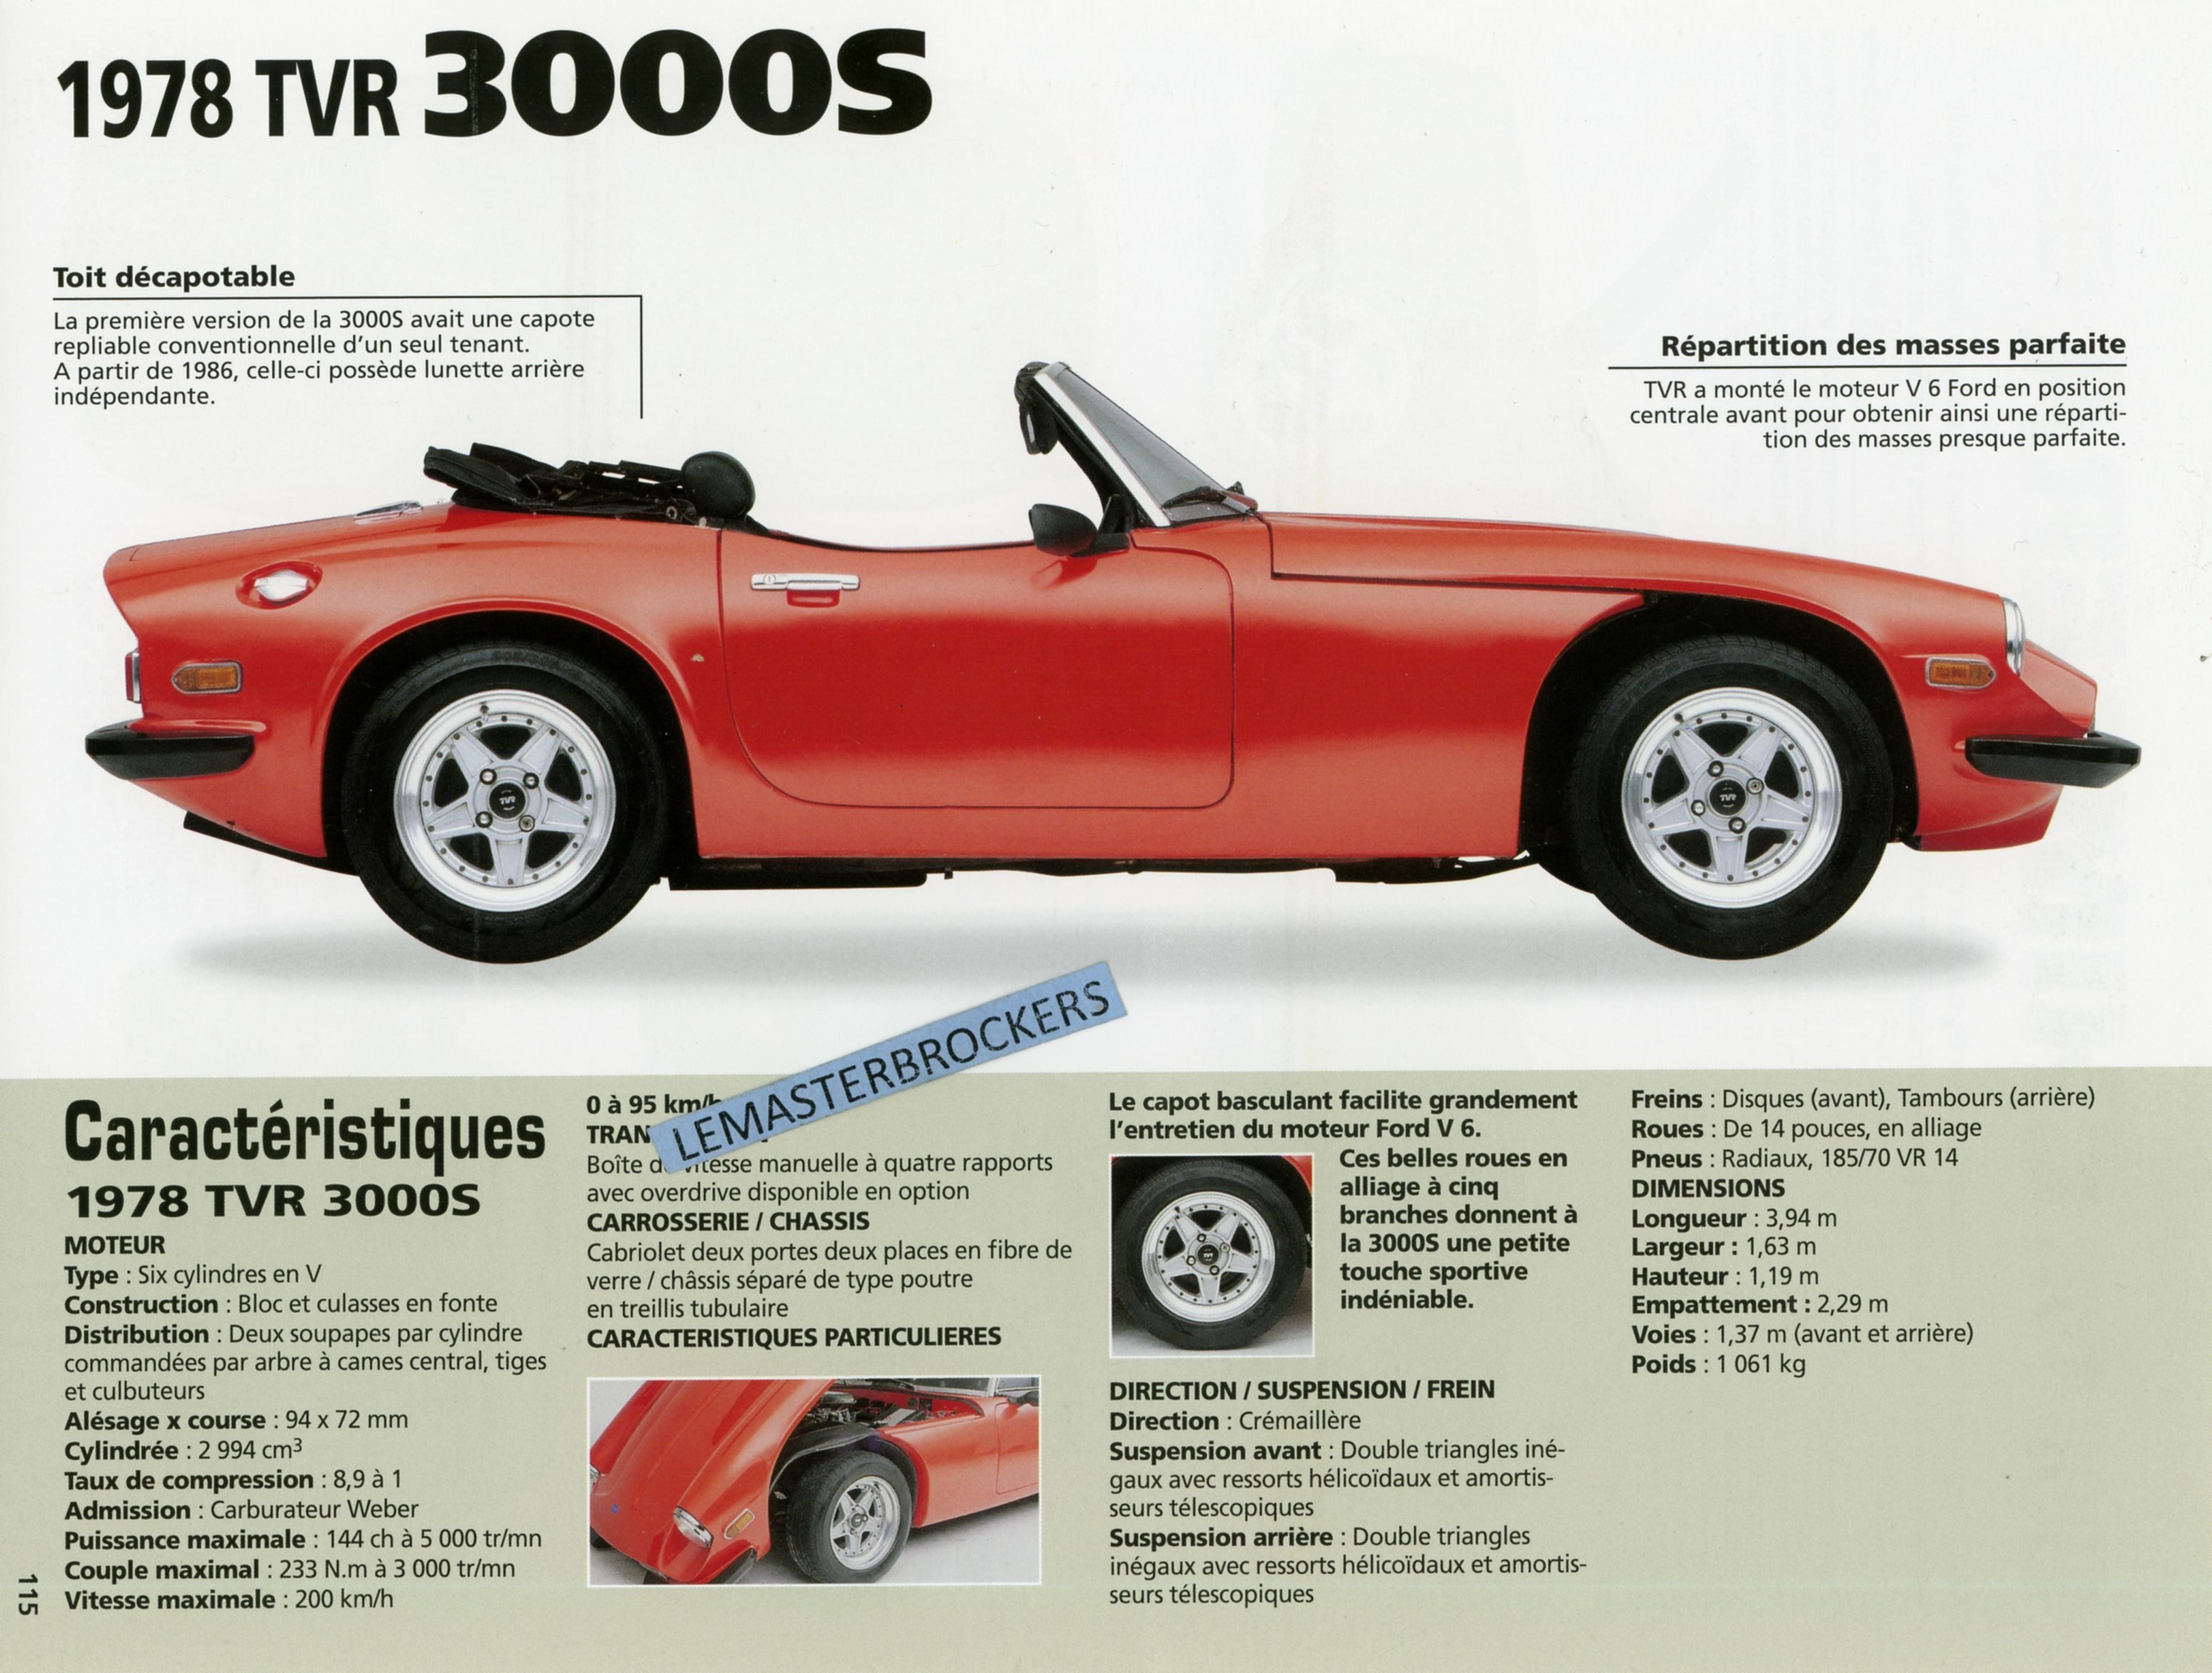 FICHE AUTO TVR 3000 LEMASTERBROCKERS